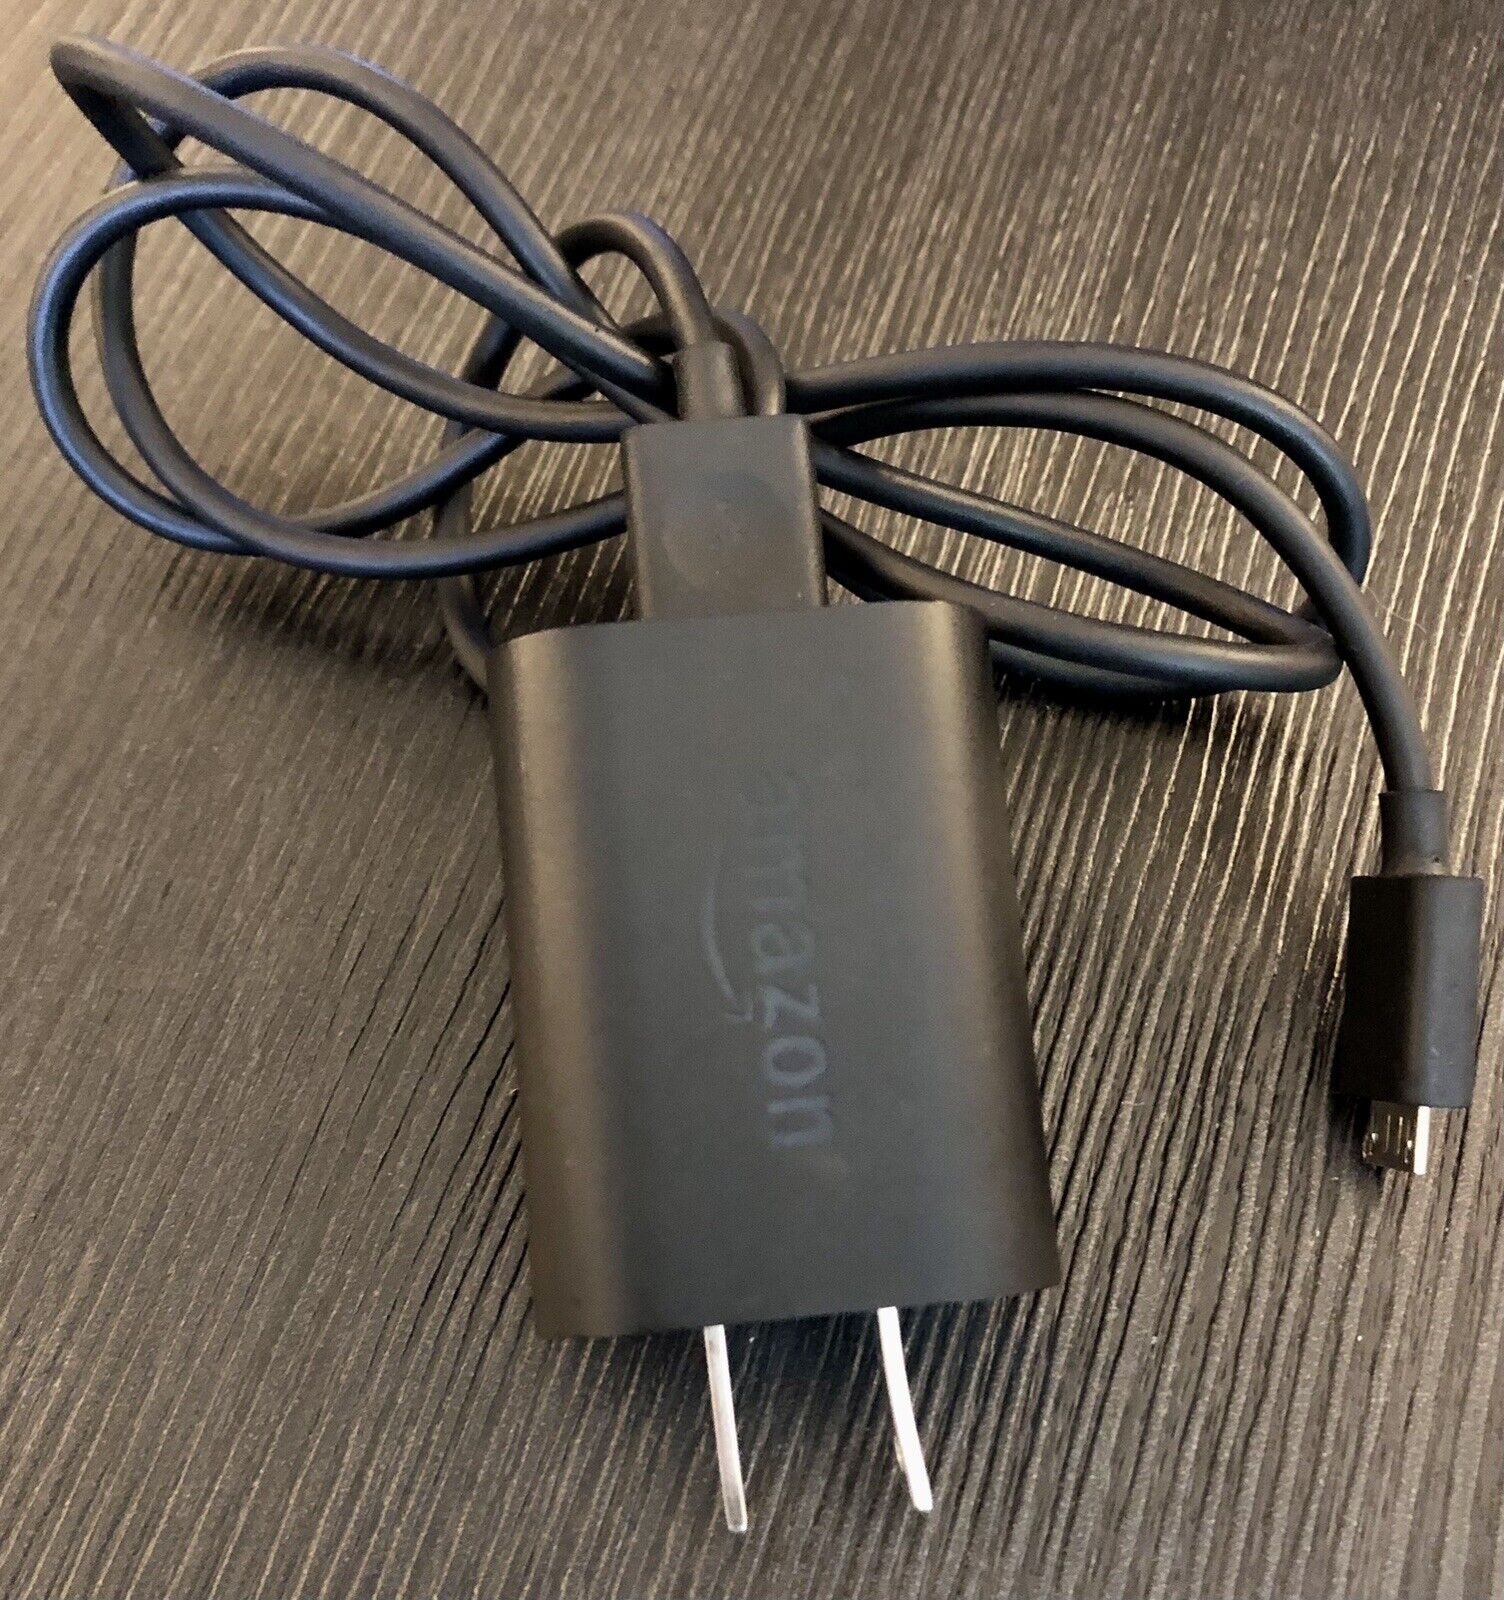 Amazon Fire Tablet/Kindle Charging Cable and Adapter